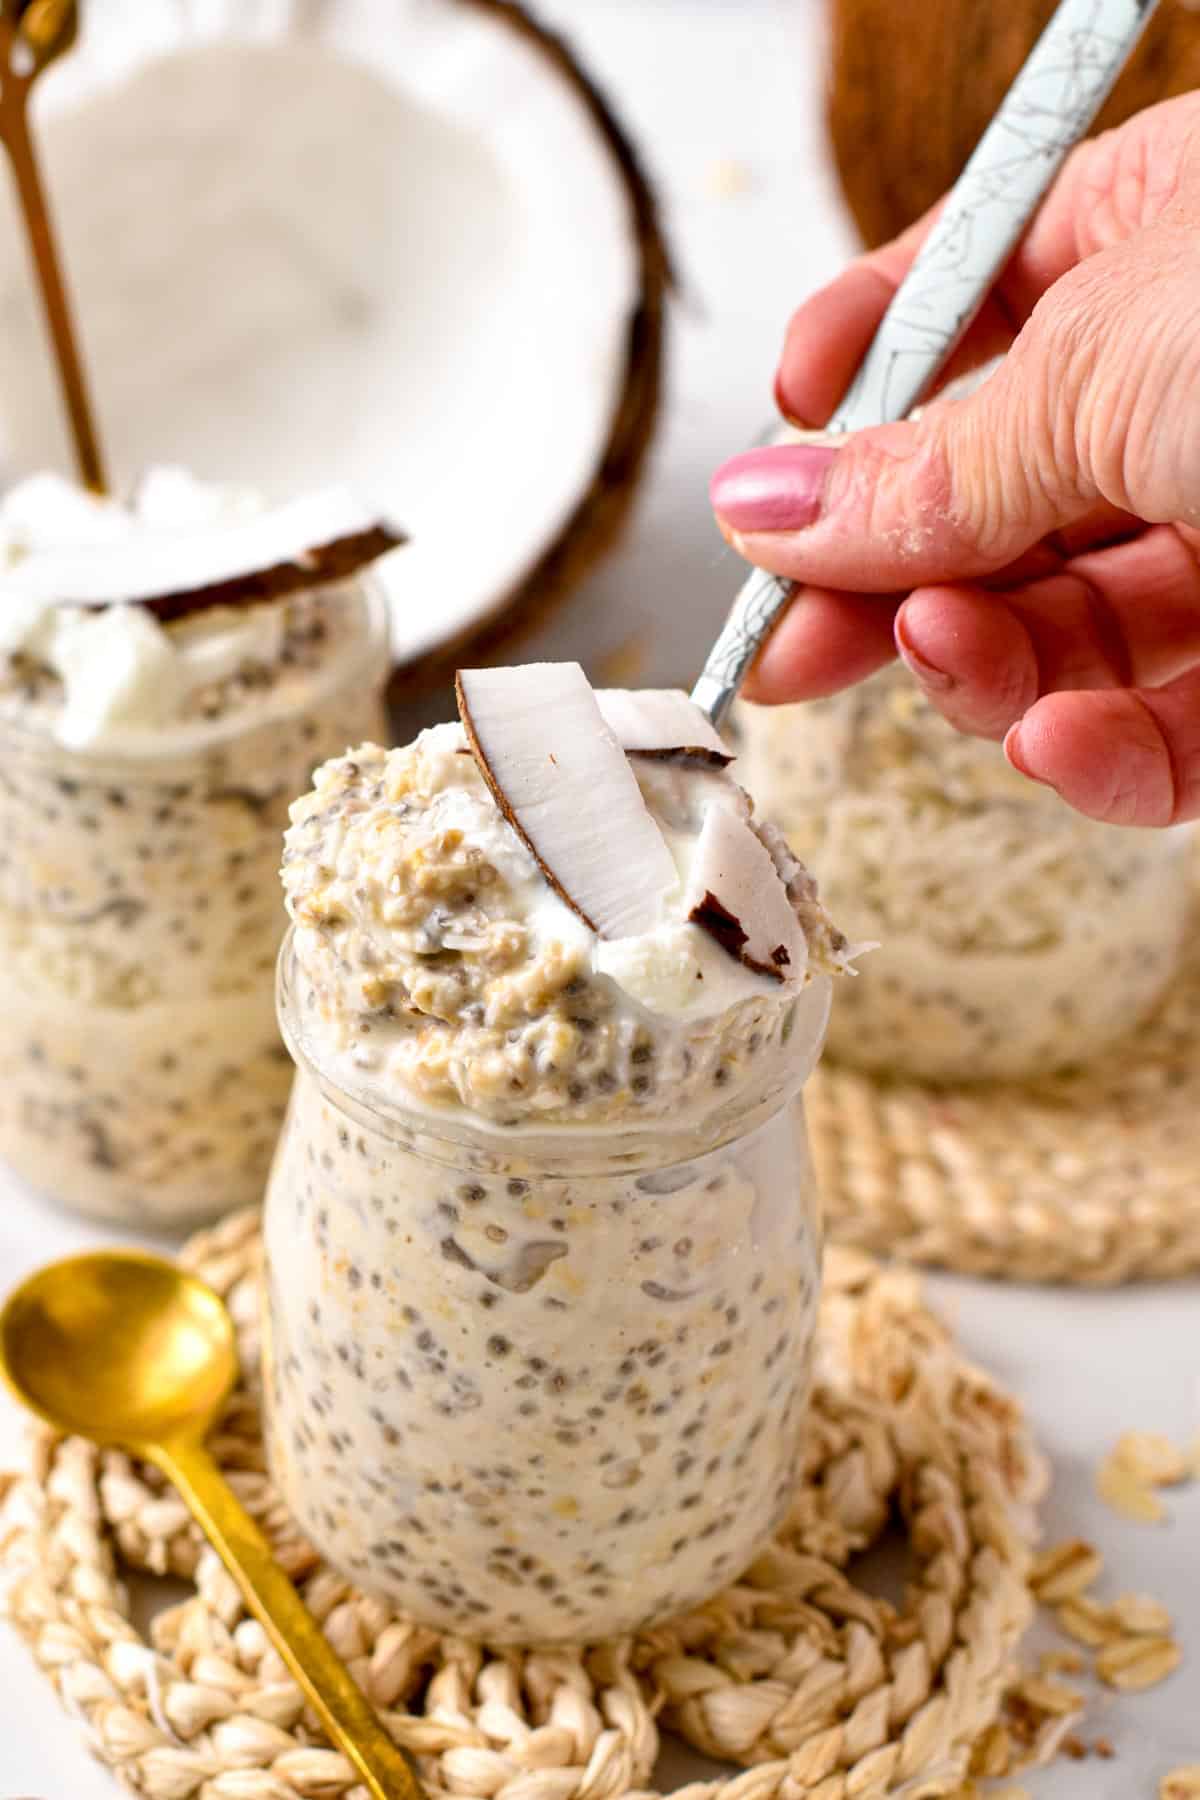 This Overnight Oats with Coconut Milk is the easiest, healthy breakfast with a dreamy creamy coconut texture. Coconut lovers, this breakfast is for you.